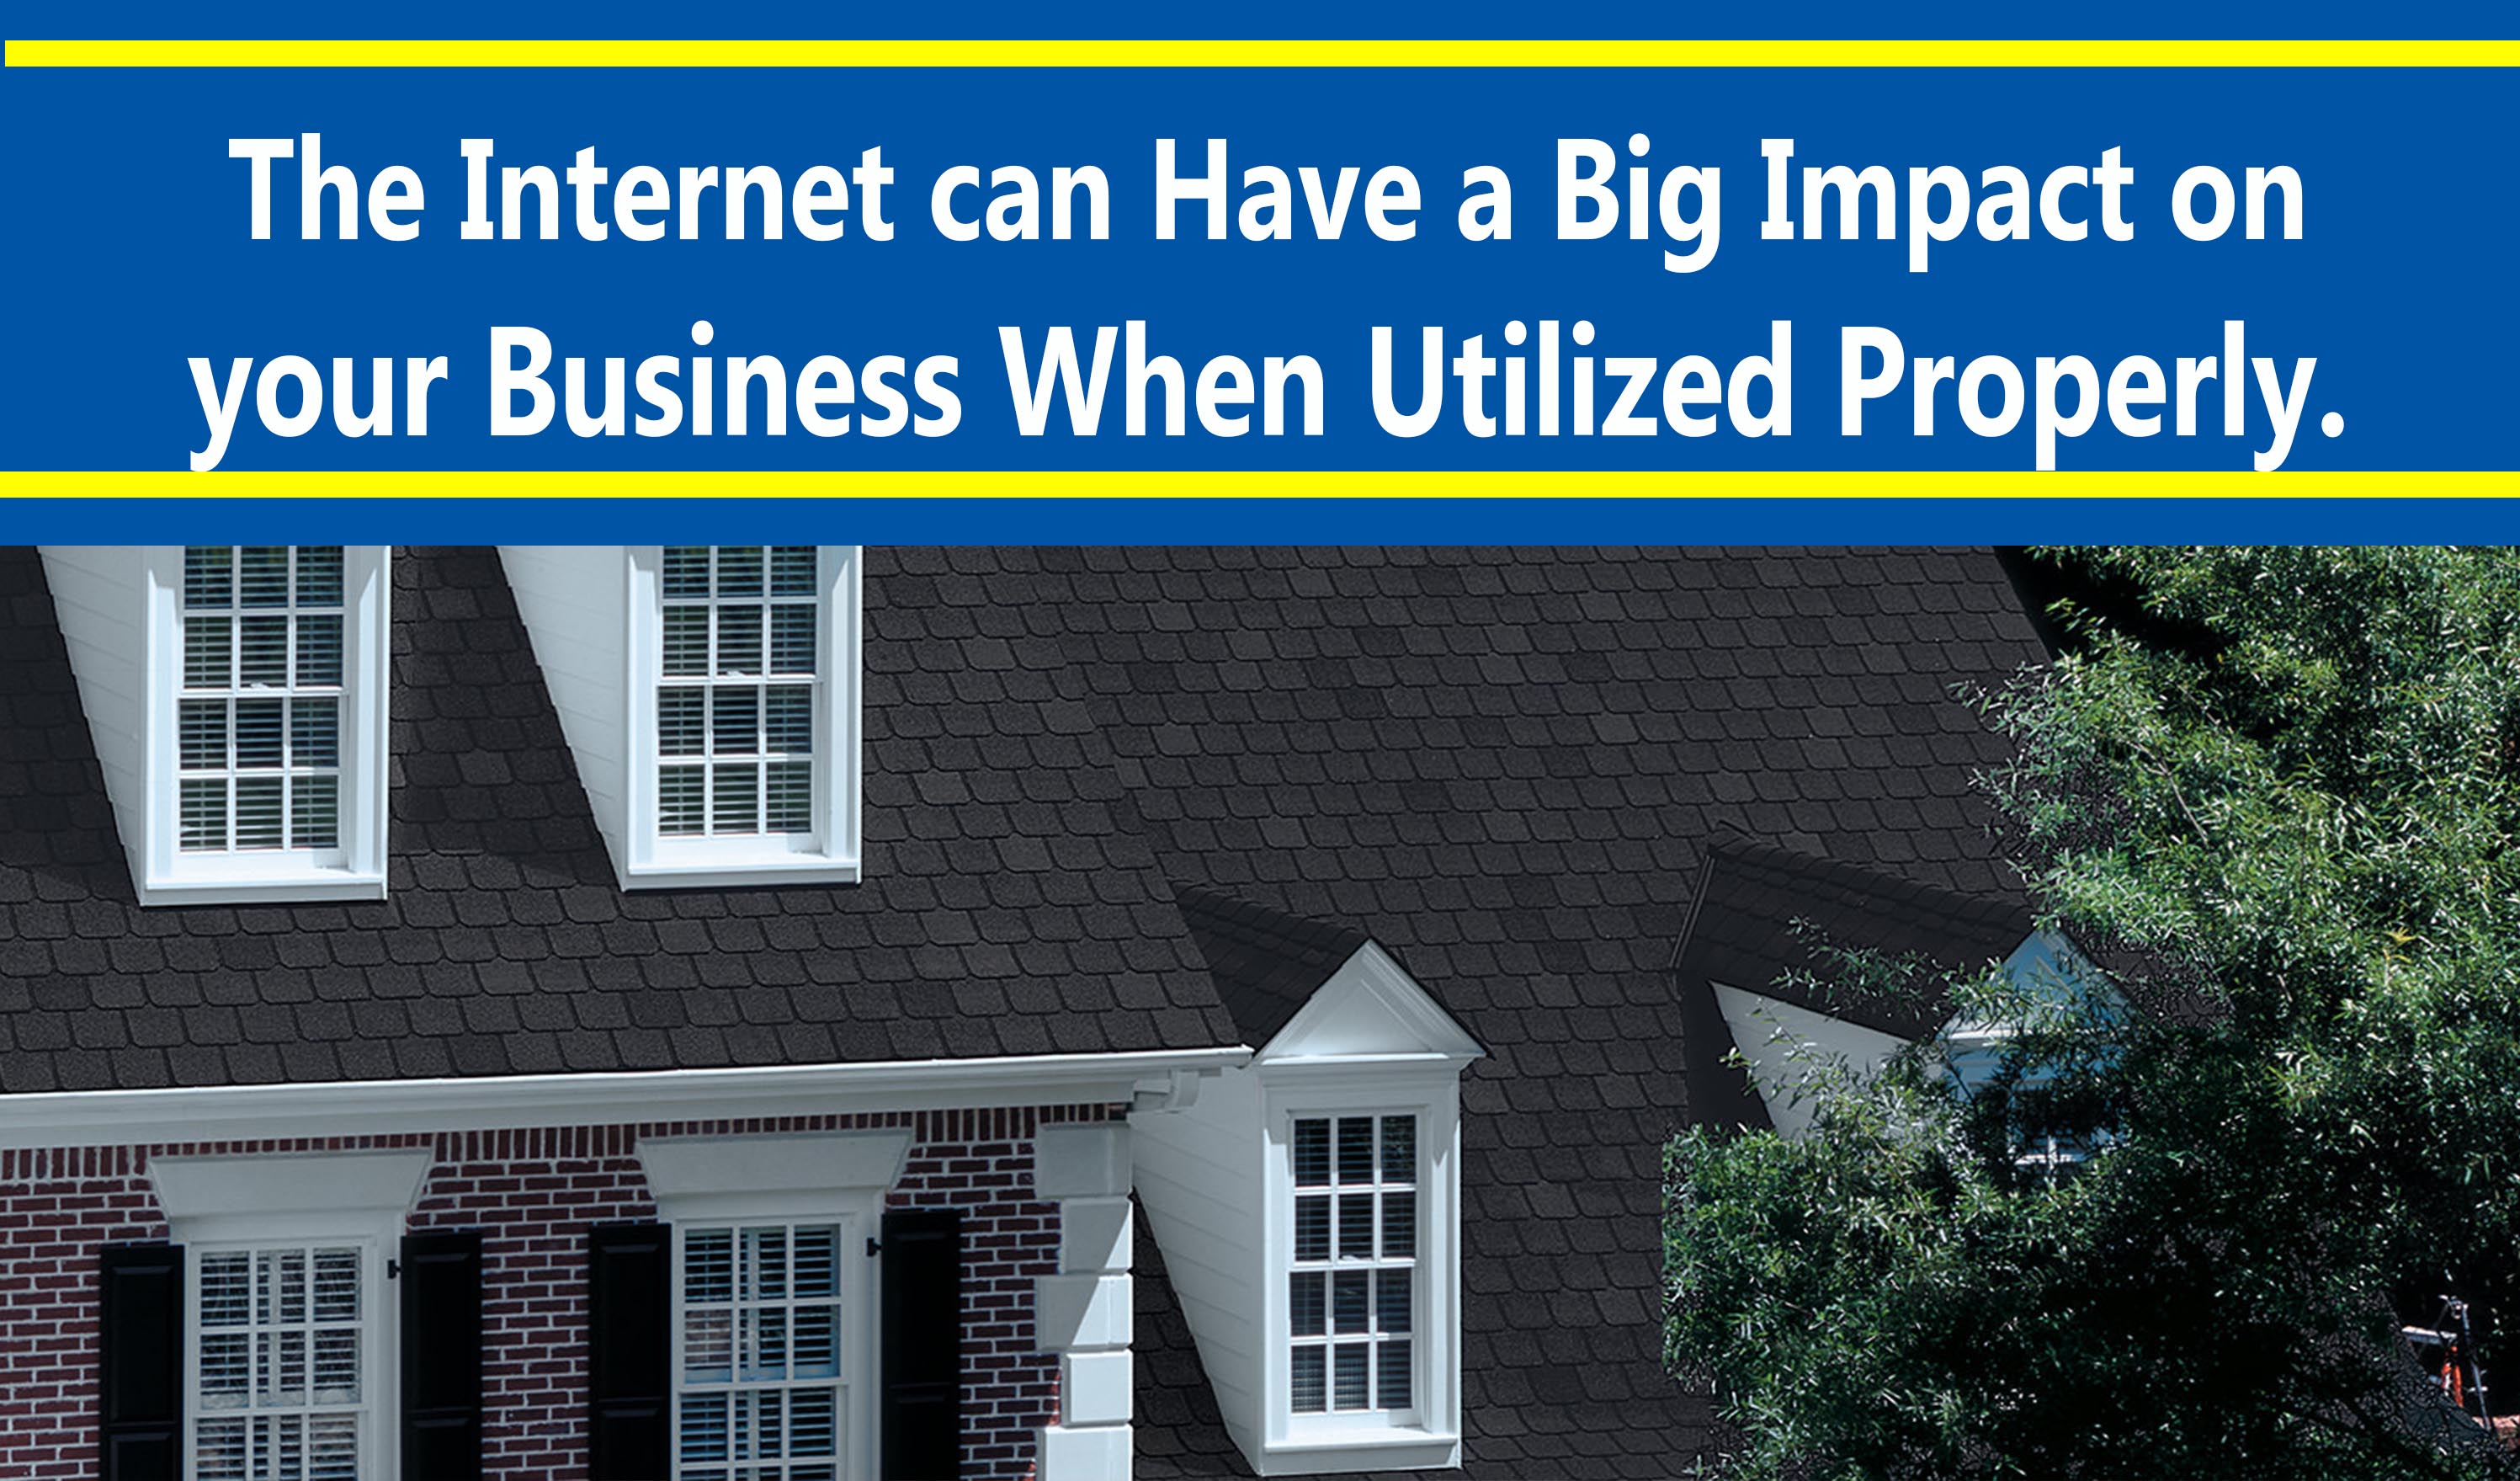 The Internet can Have a Big Impact on your Business When Utilized Properly.